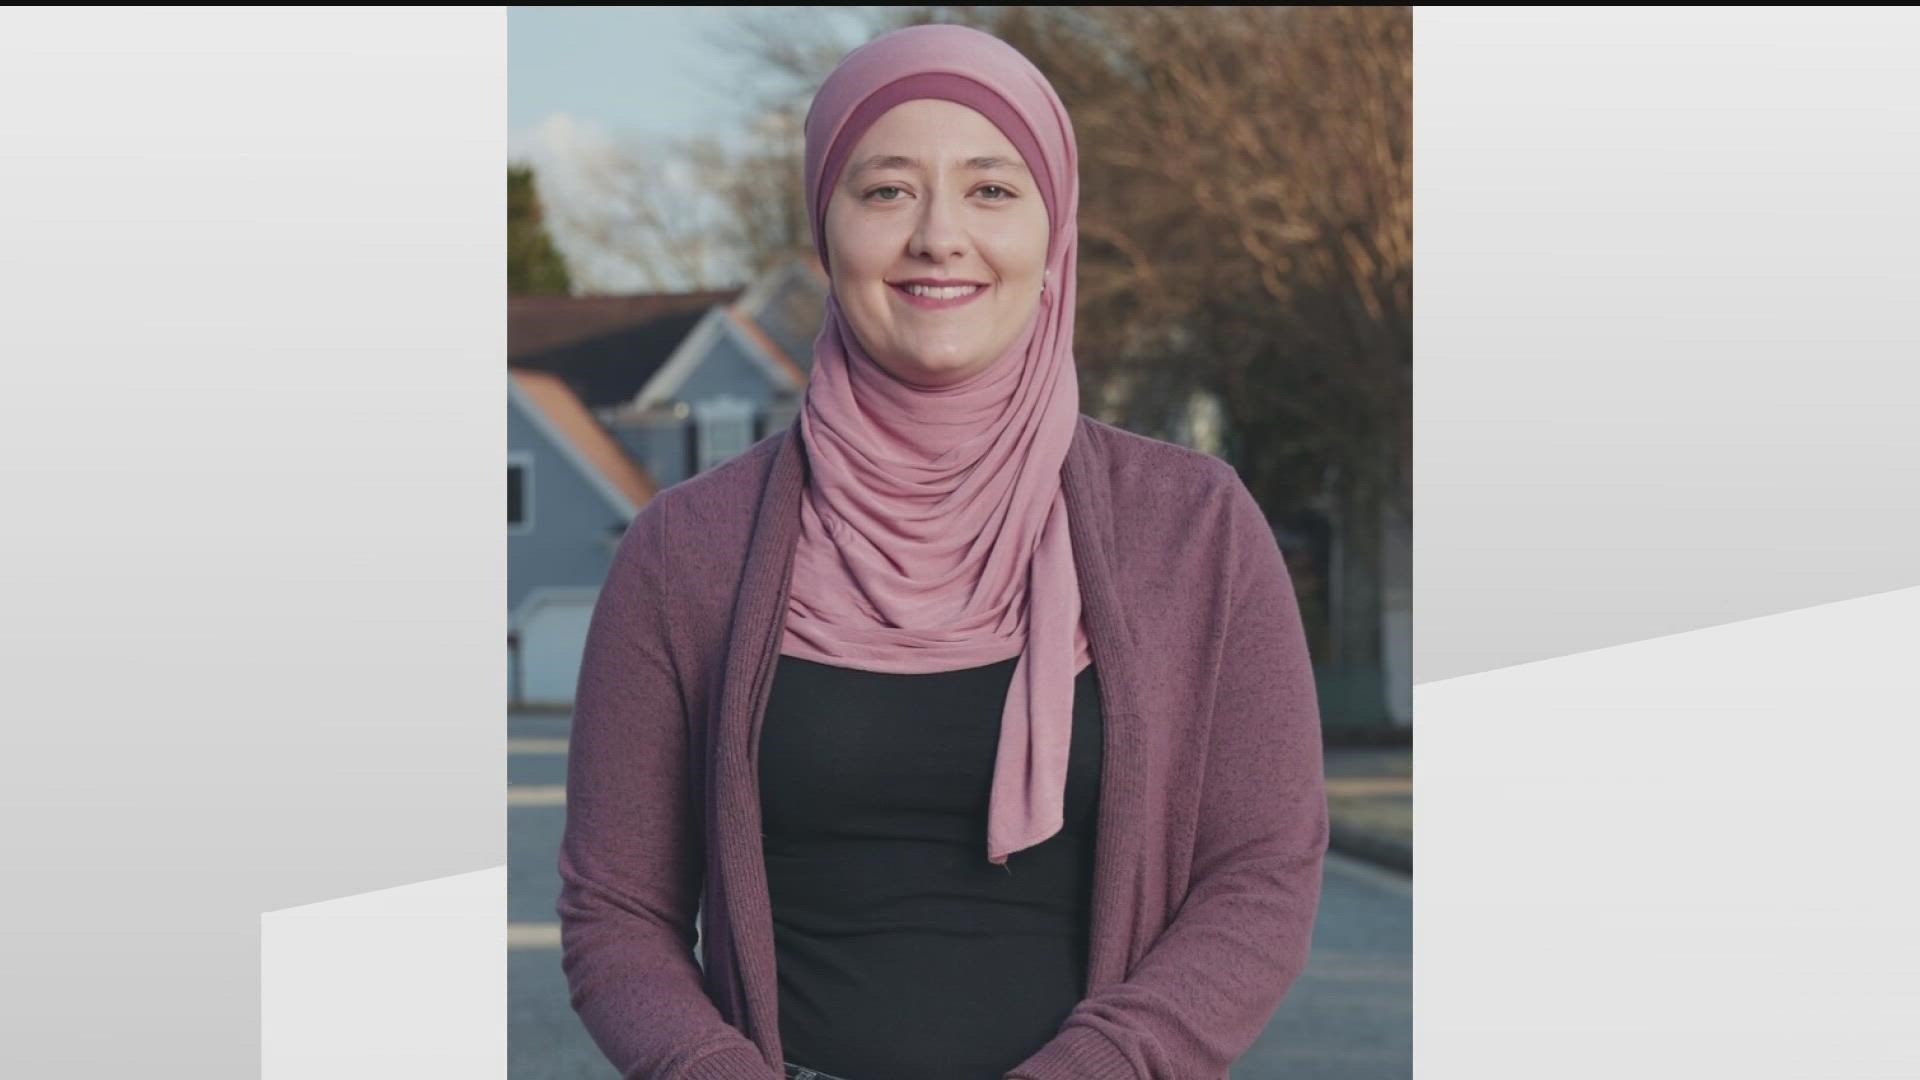 Romman is the first Muslim woman elected to the Georgia House of Representatives and the first Palestinian elected to Georgia public office.